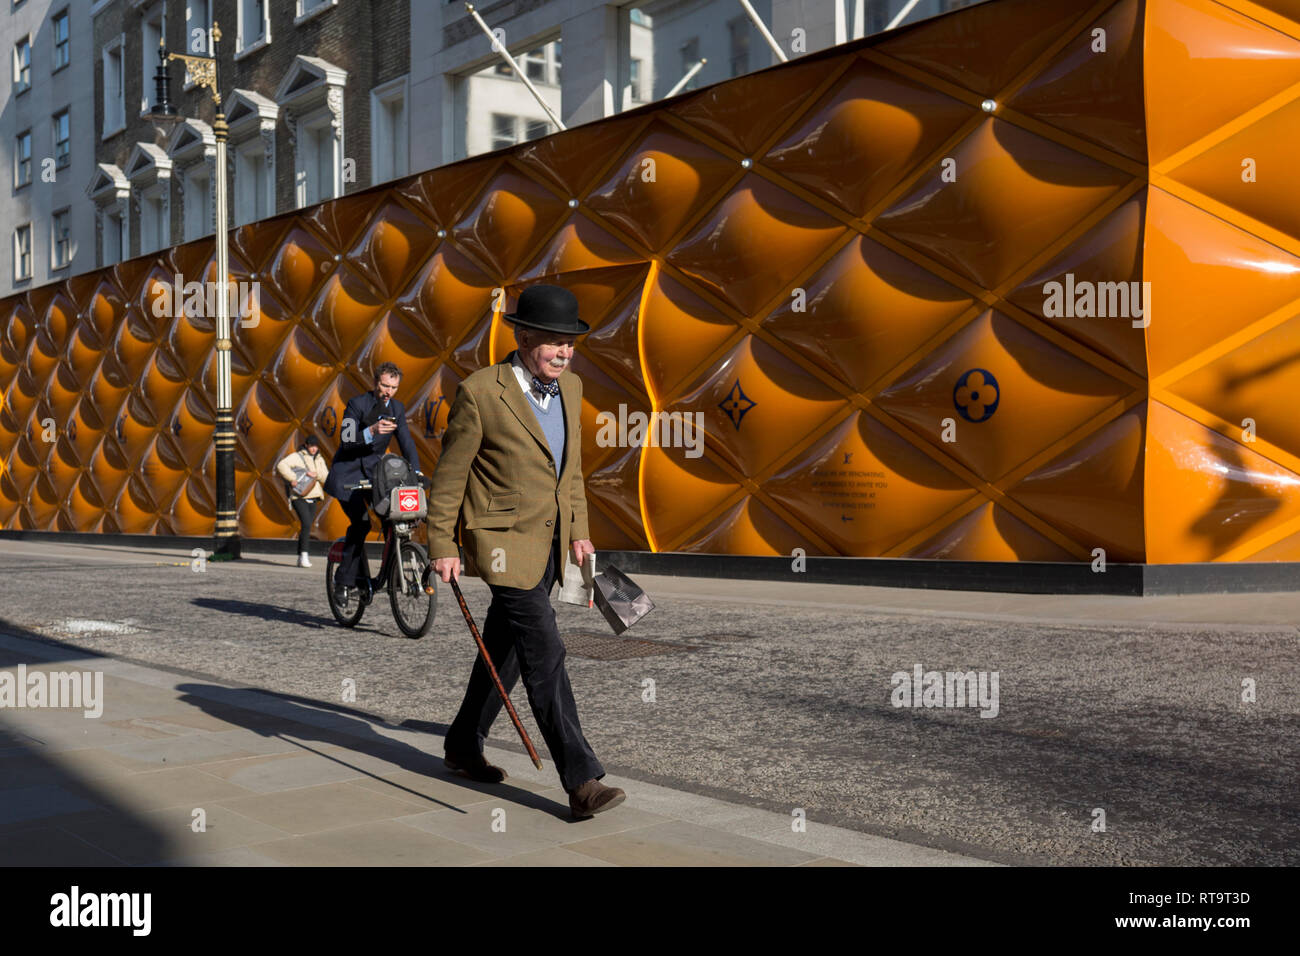 A classically-dressed English gentleman walks the temporary renovation hoarding of luxury brand Louis Vuitton in New Bond Street, on 27th February 2019, in London, England Stock Photo - Alamy